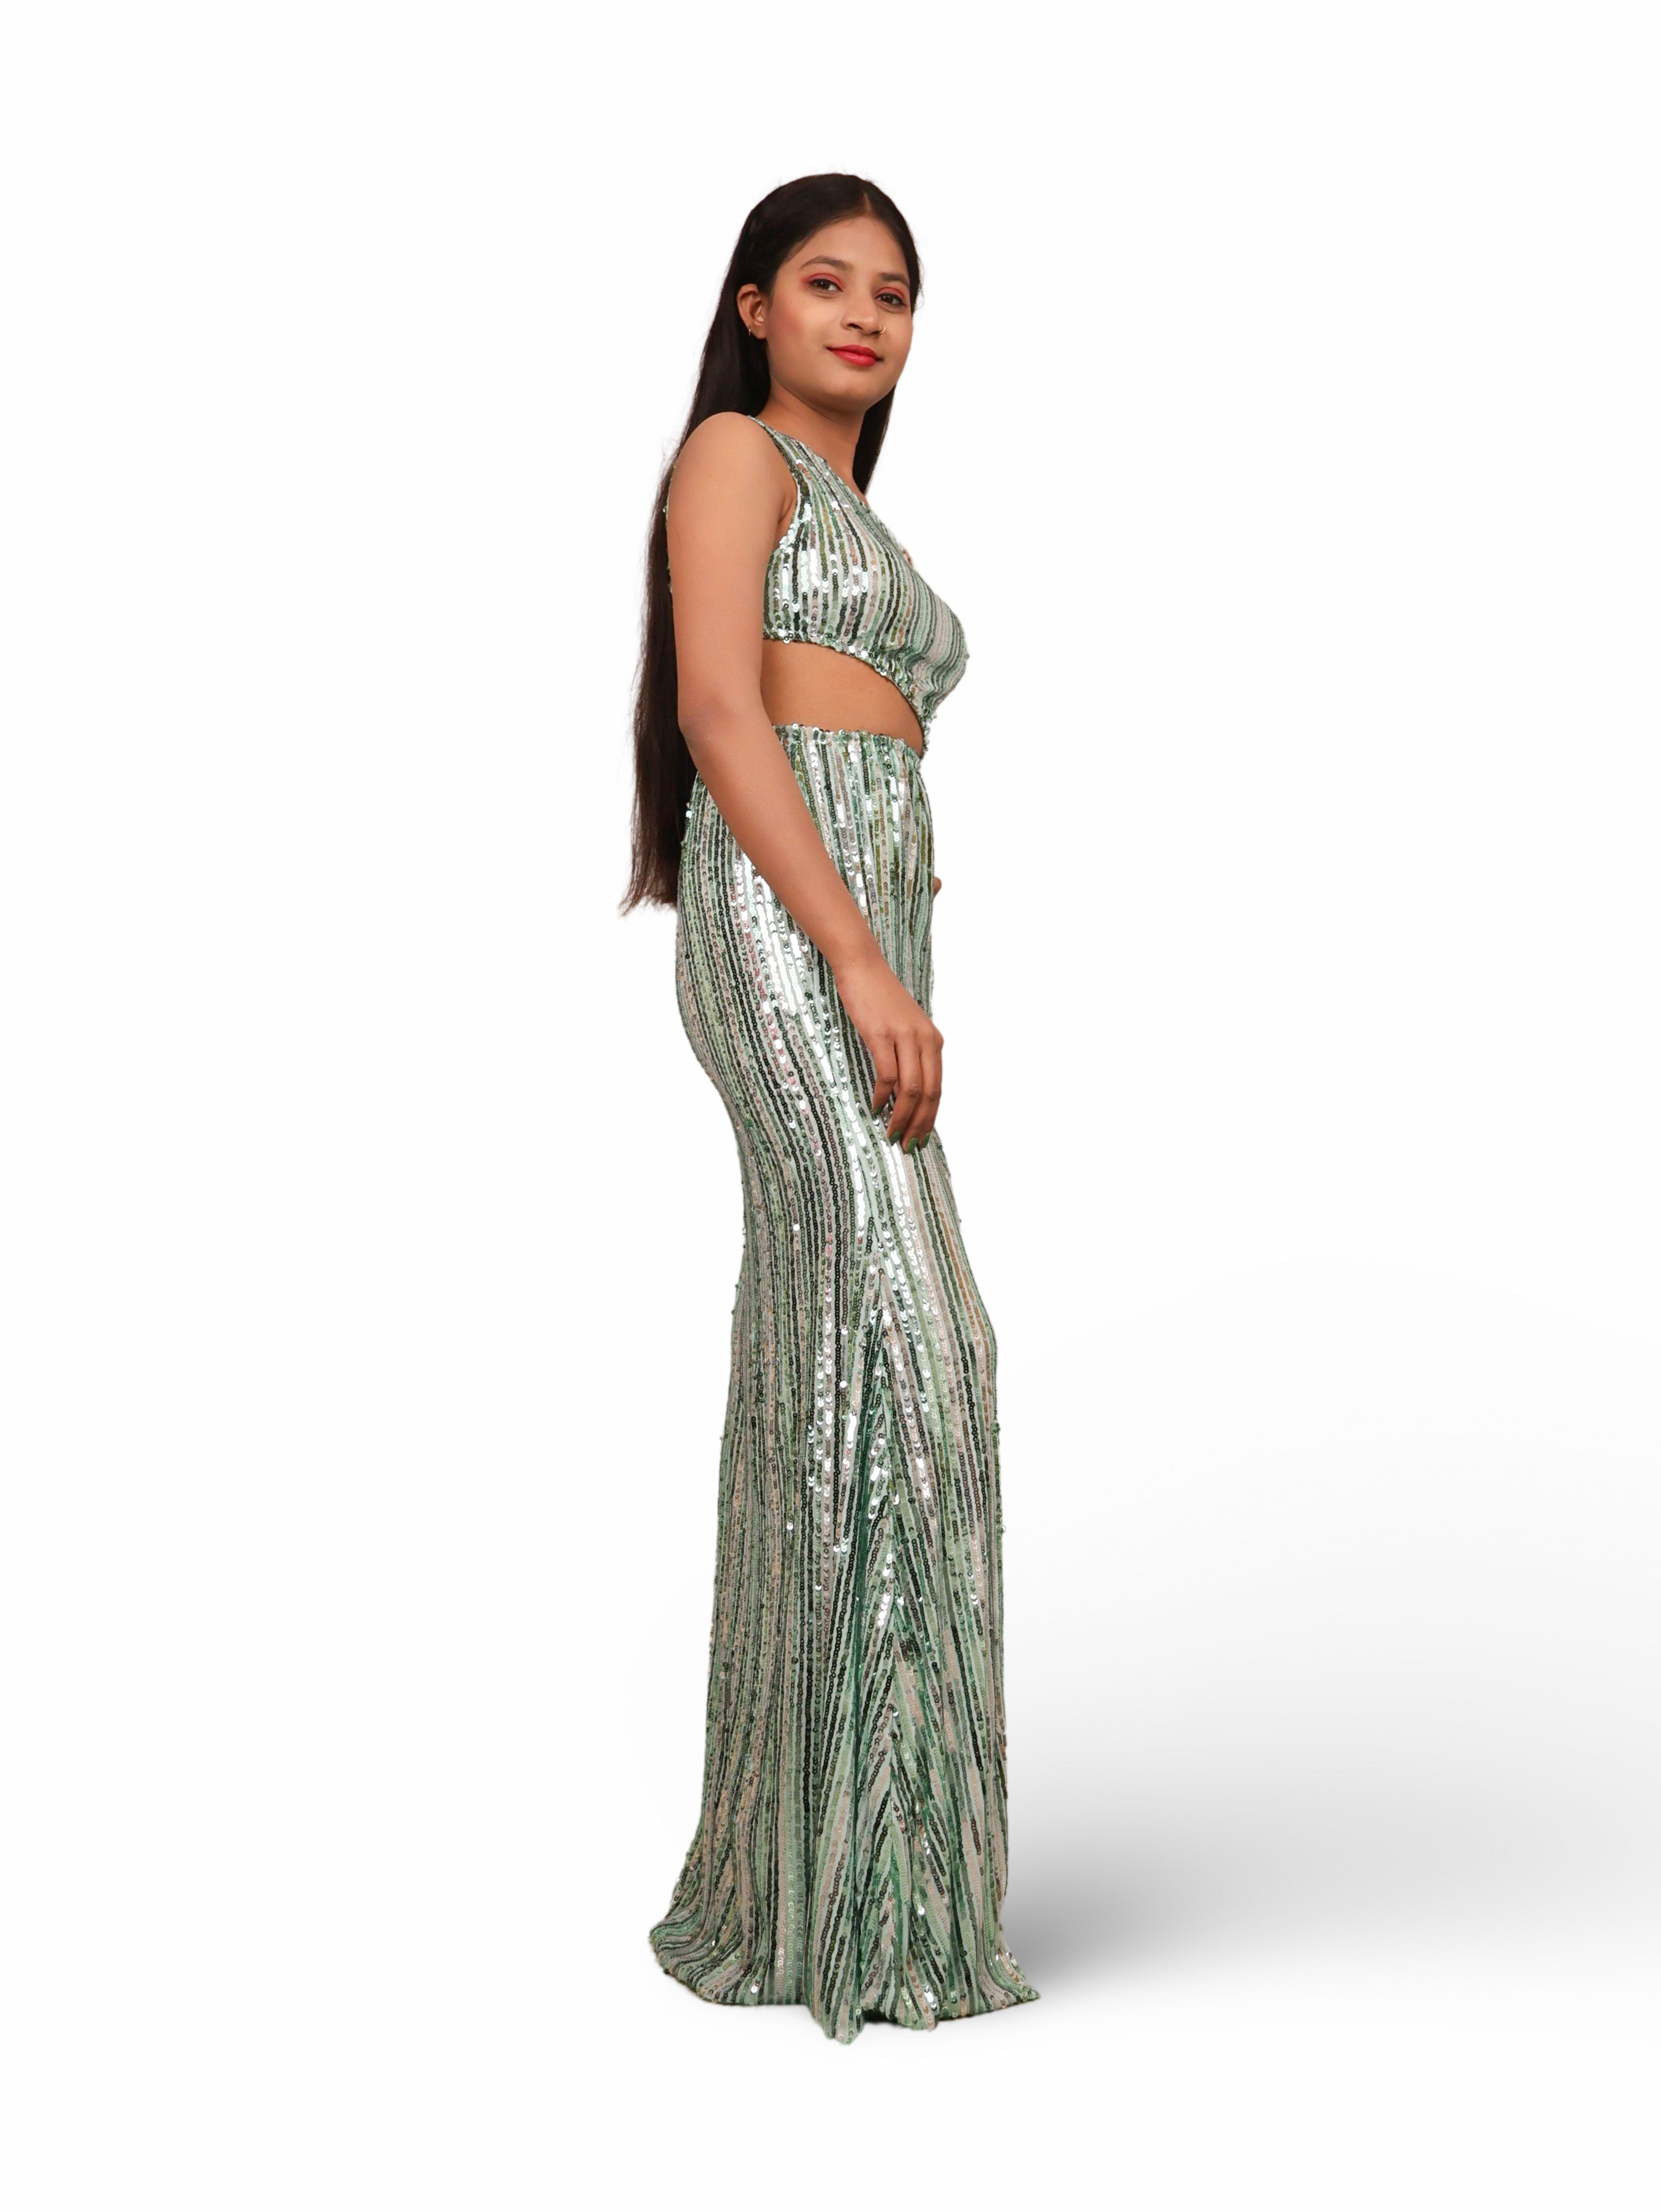 One-Shoulder Sequin Maxi Party Dress by Shreekama Green Dress for Party Festival Wedding Occasion in Noida